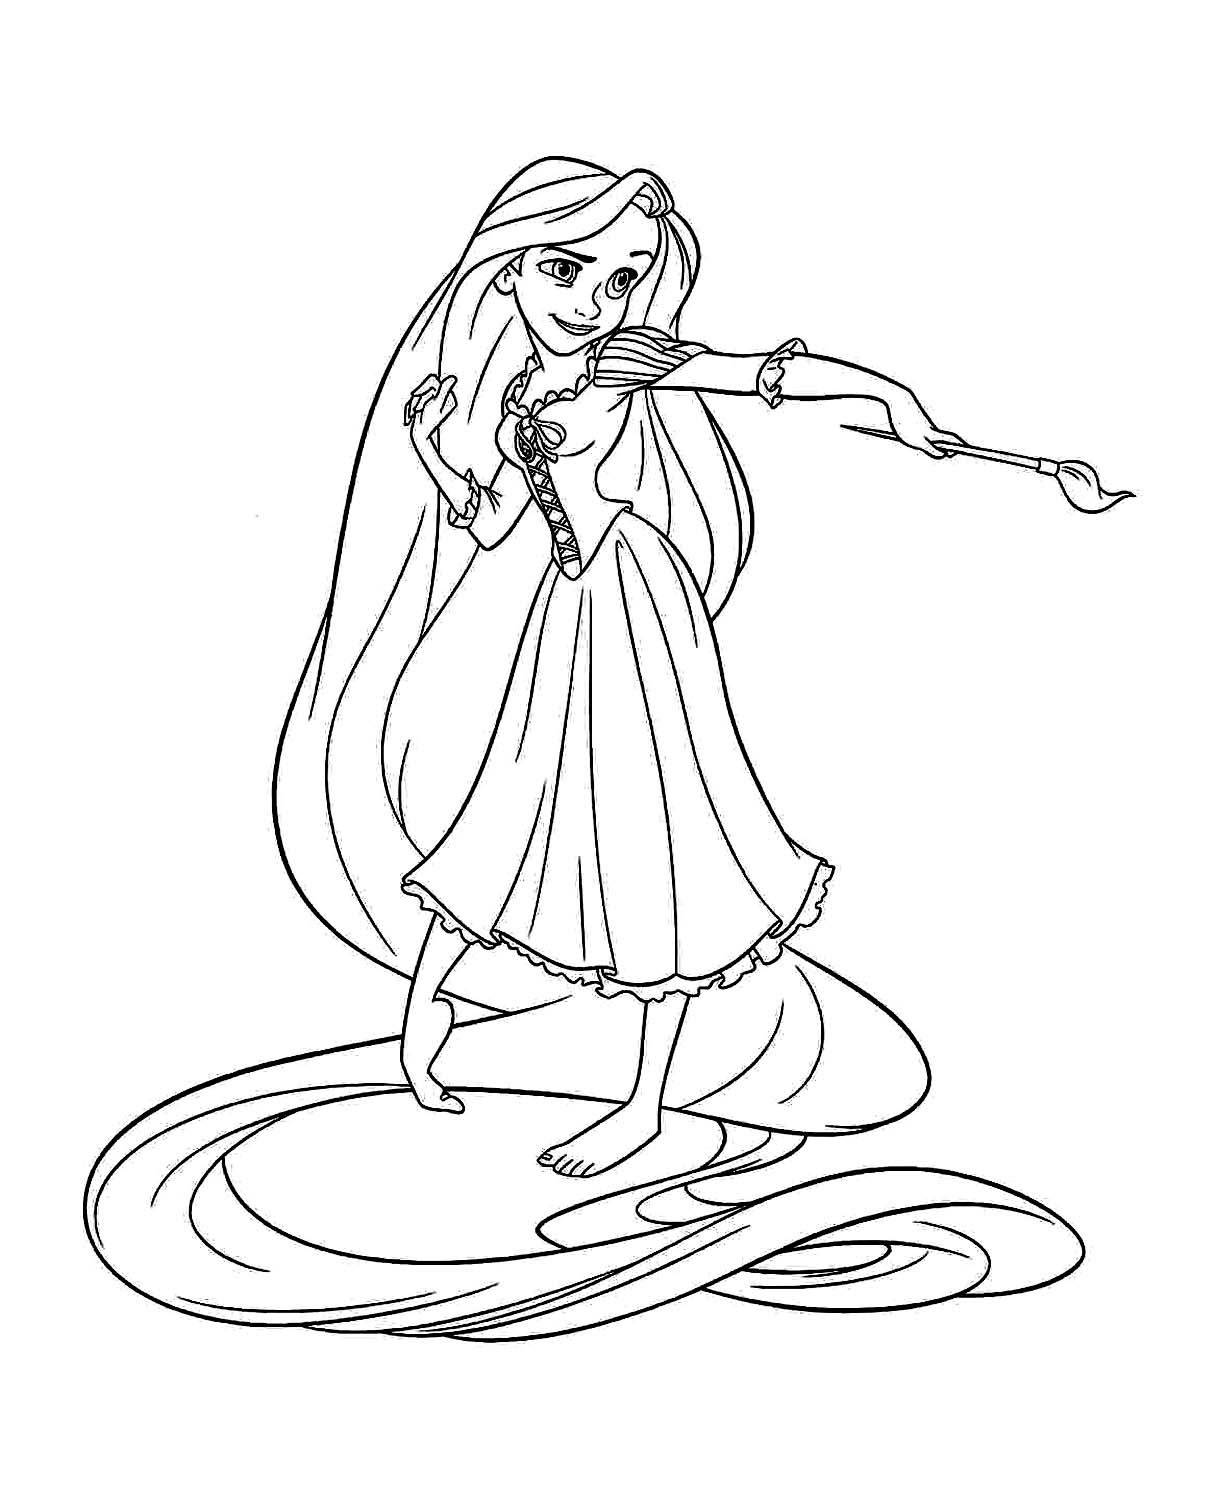 Rapunzel in a Printable Tangled coloring page to print and color